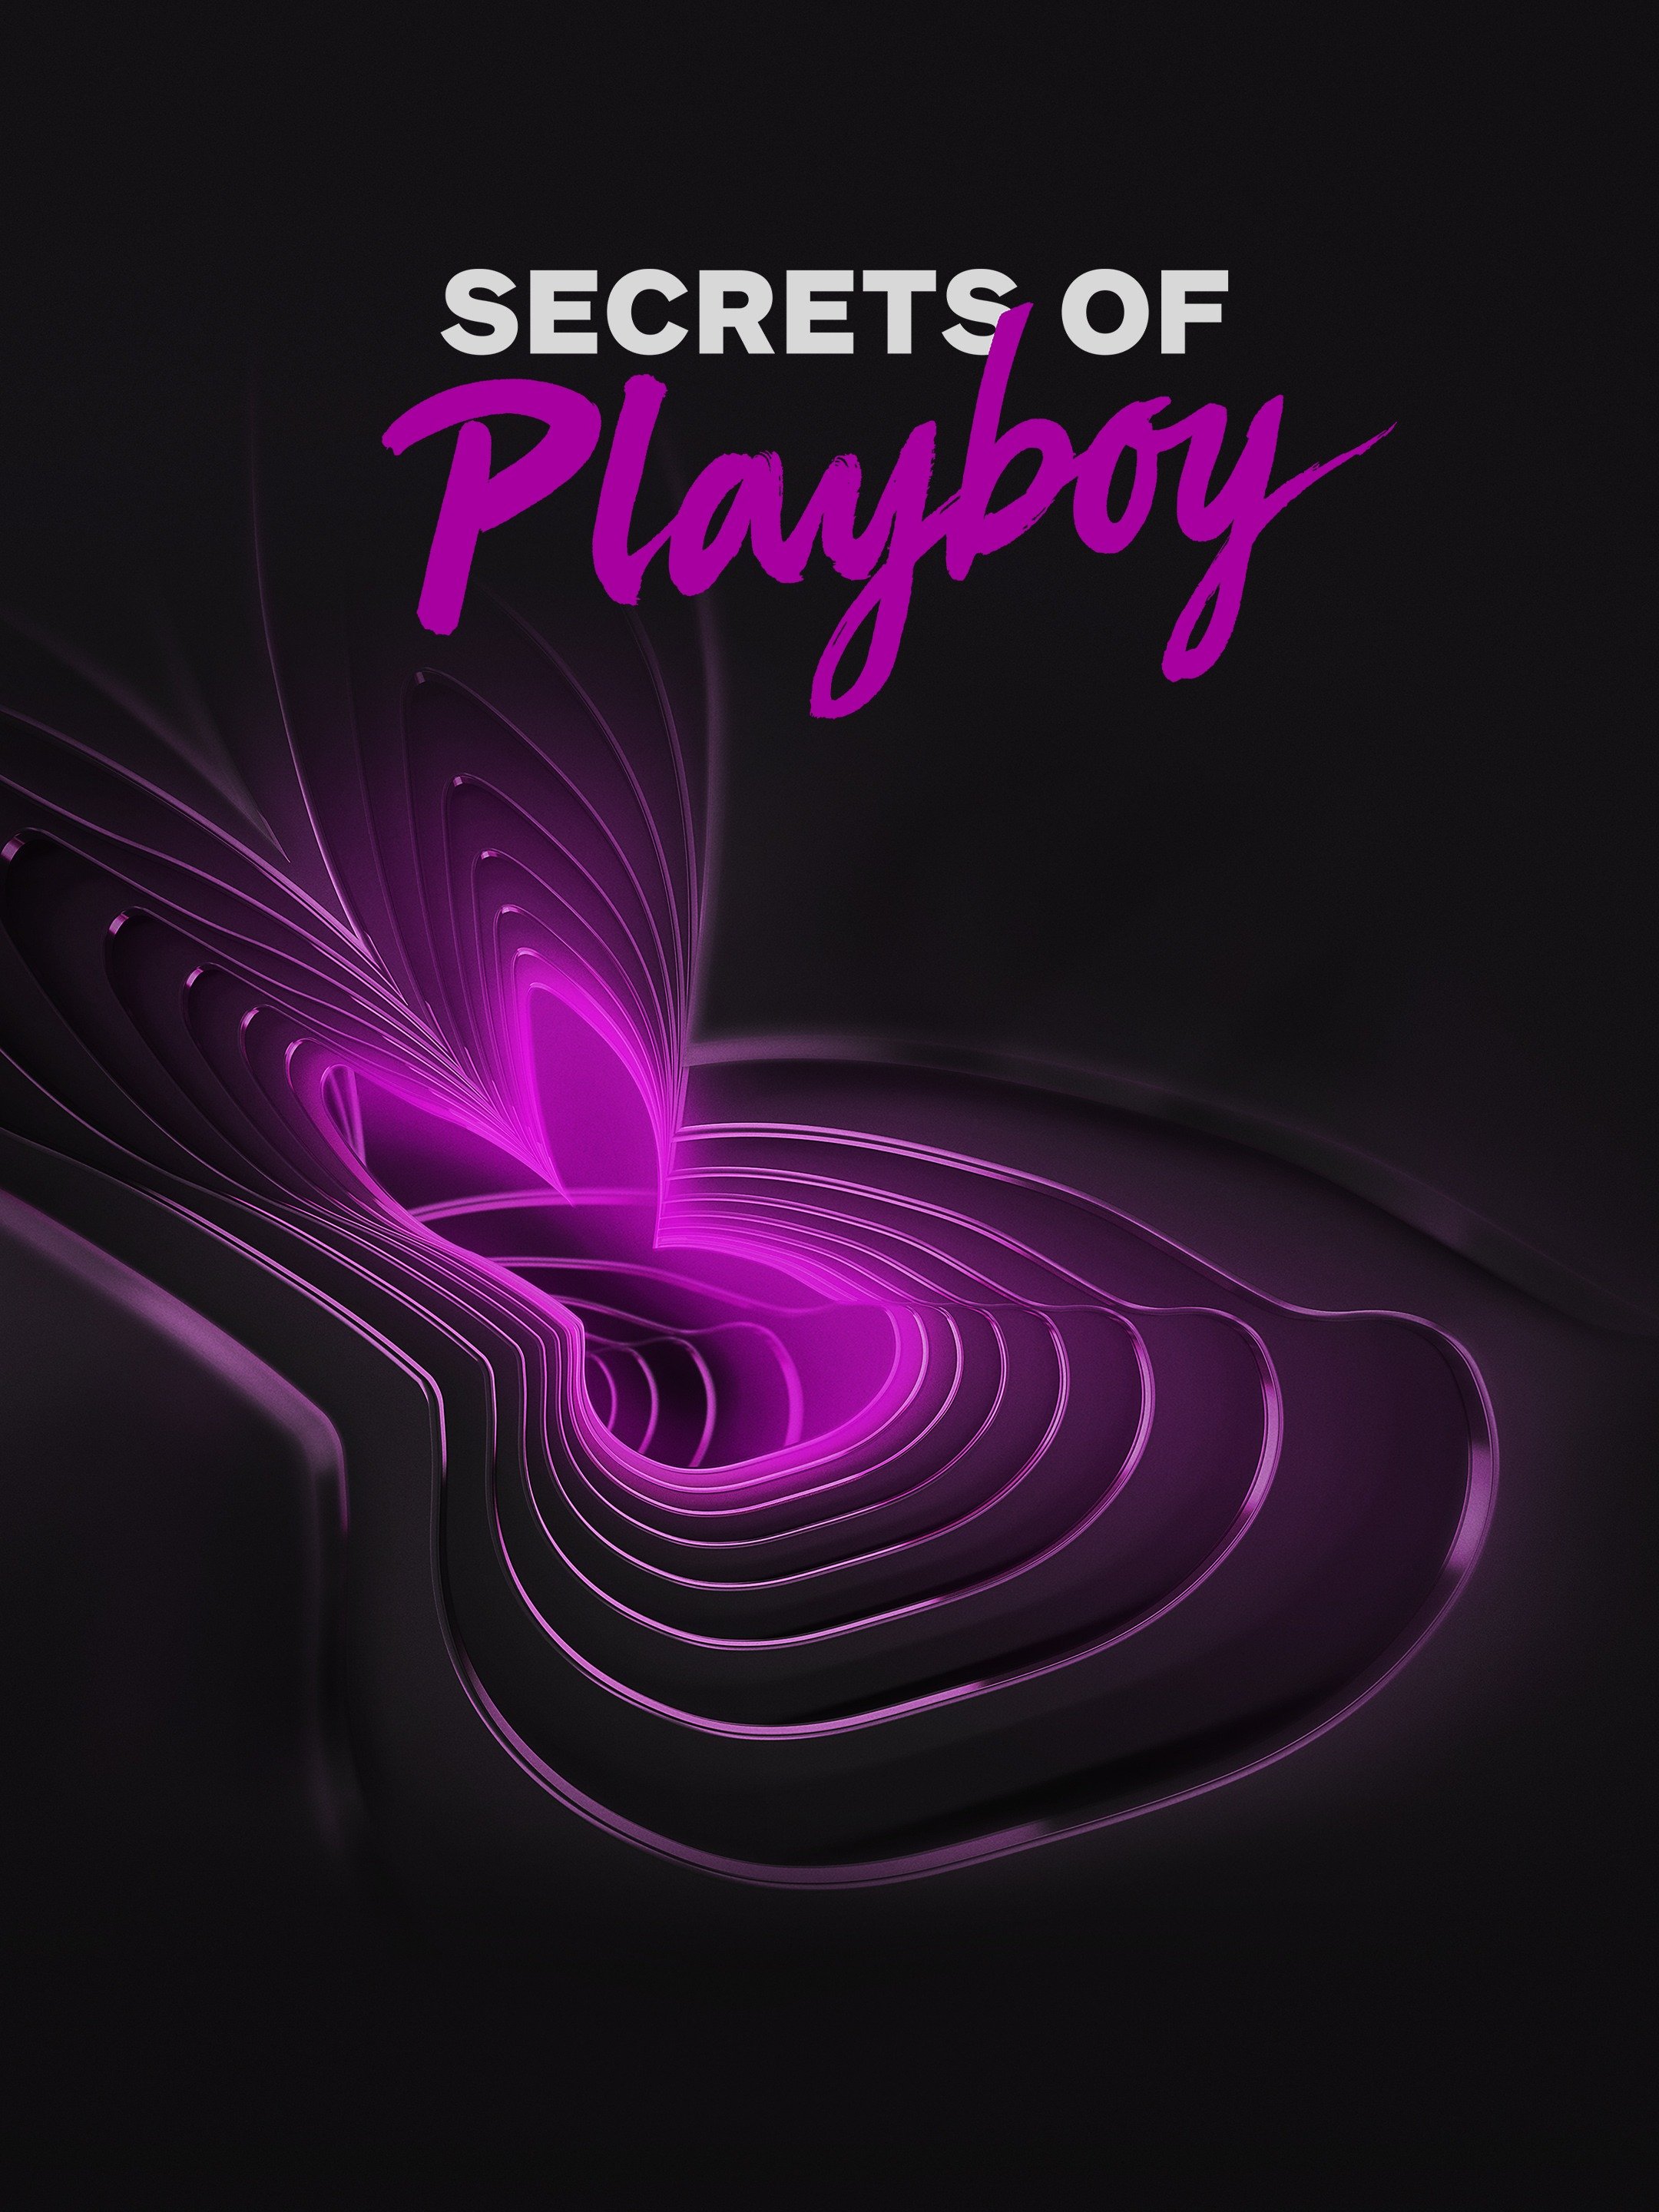 Secrets of Playboy picture